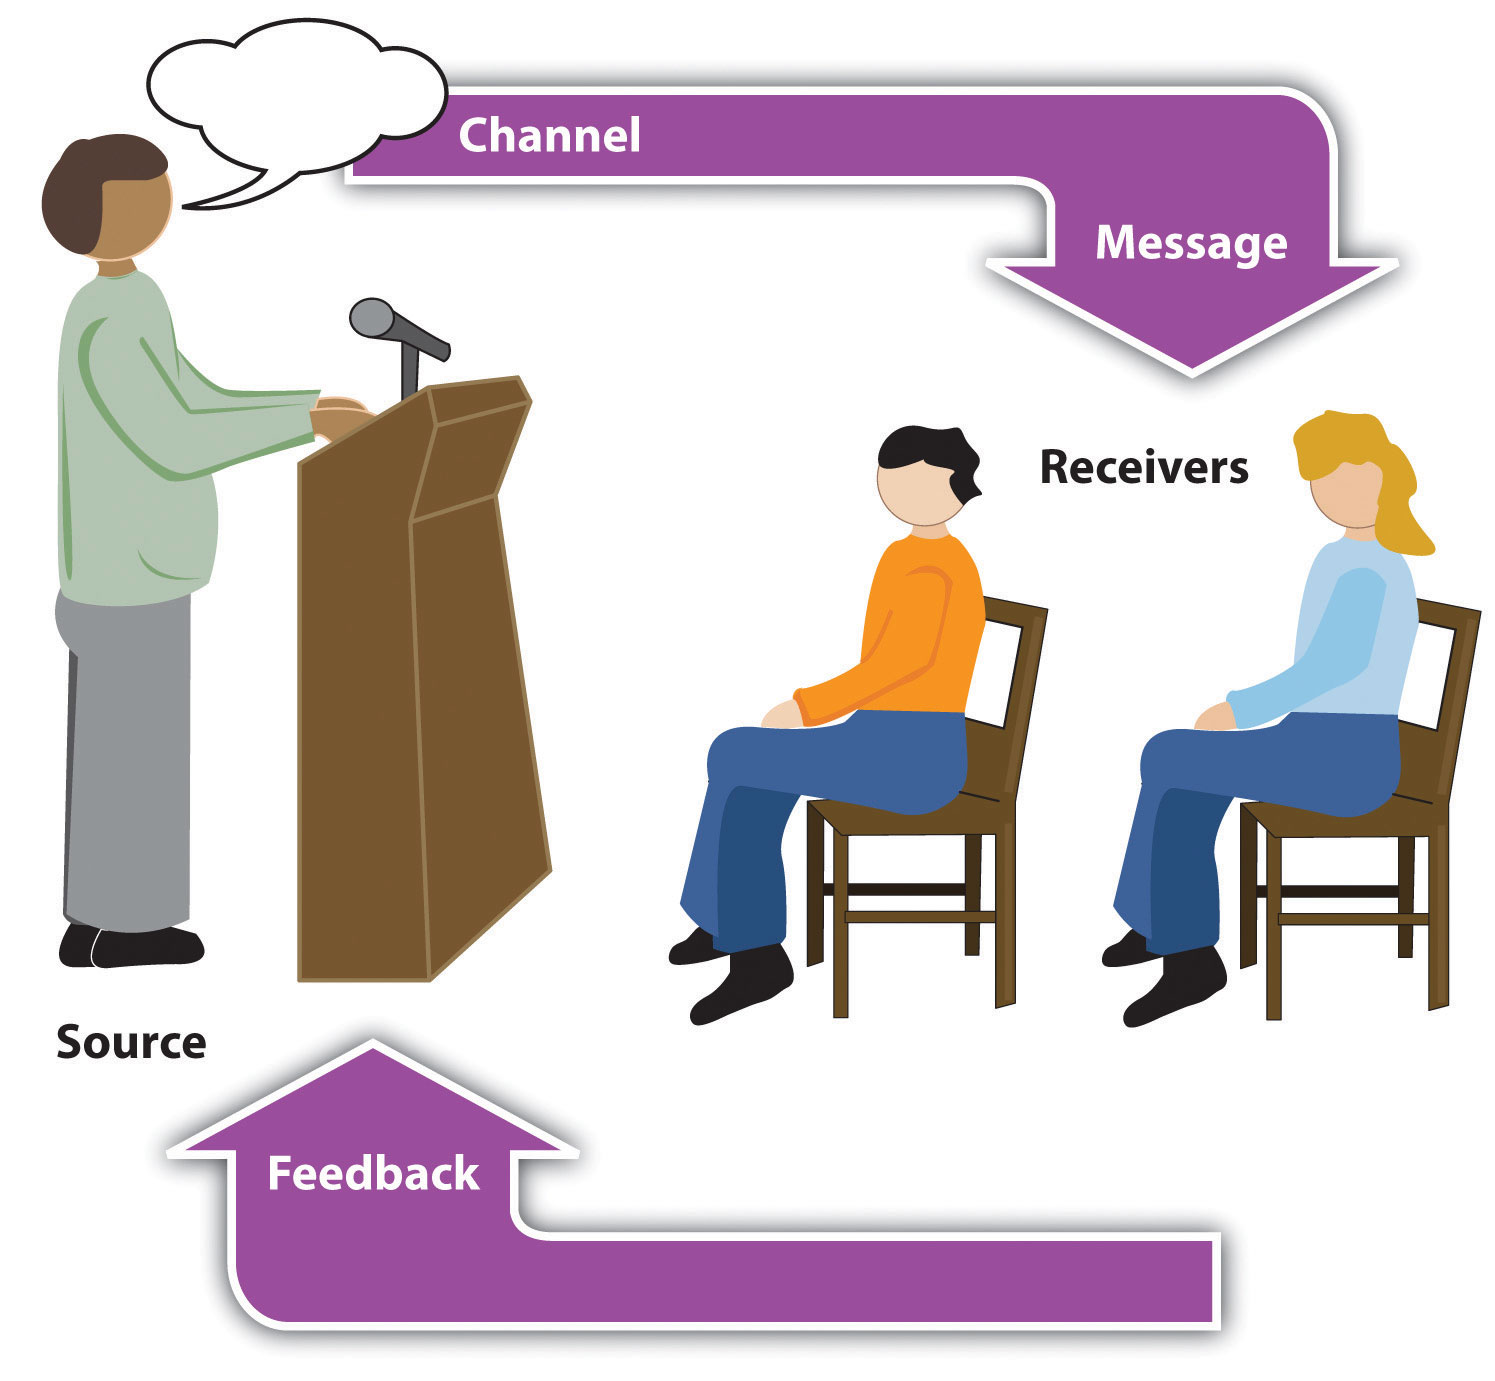 The source speaks a message through a channel to receivers. Feedback is then given to the source by the receivers